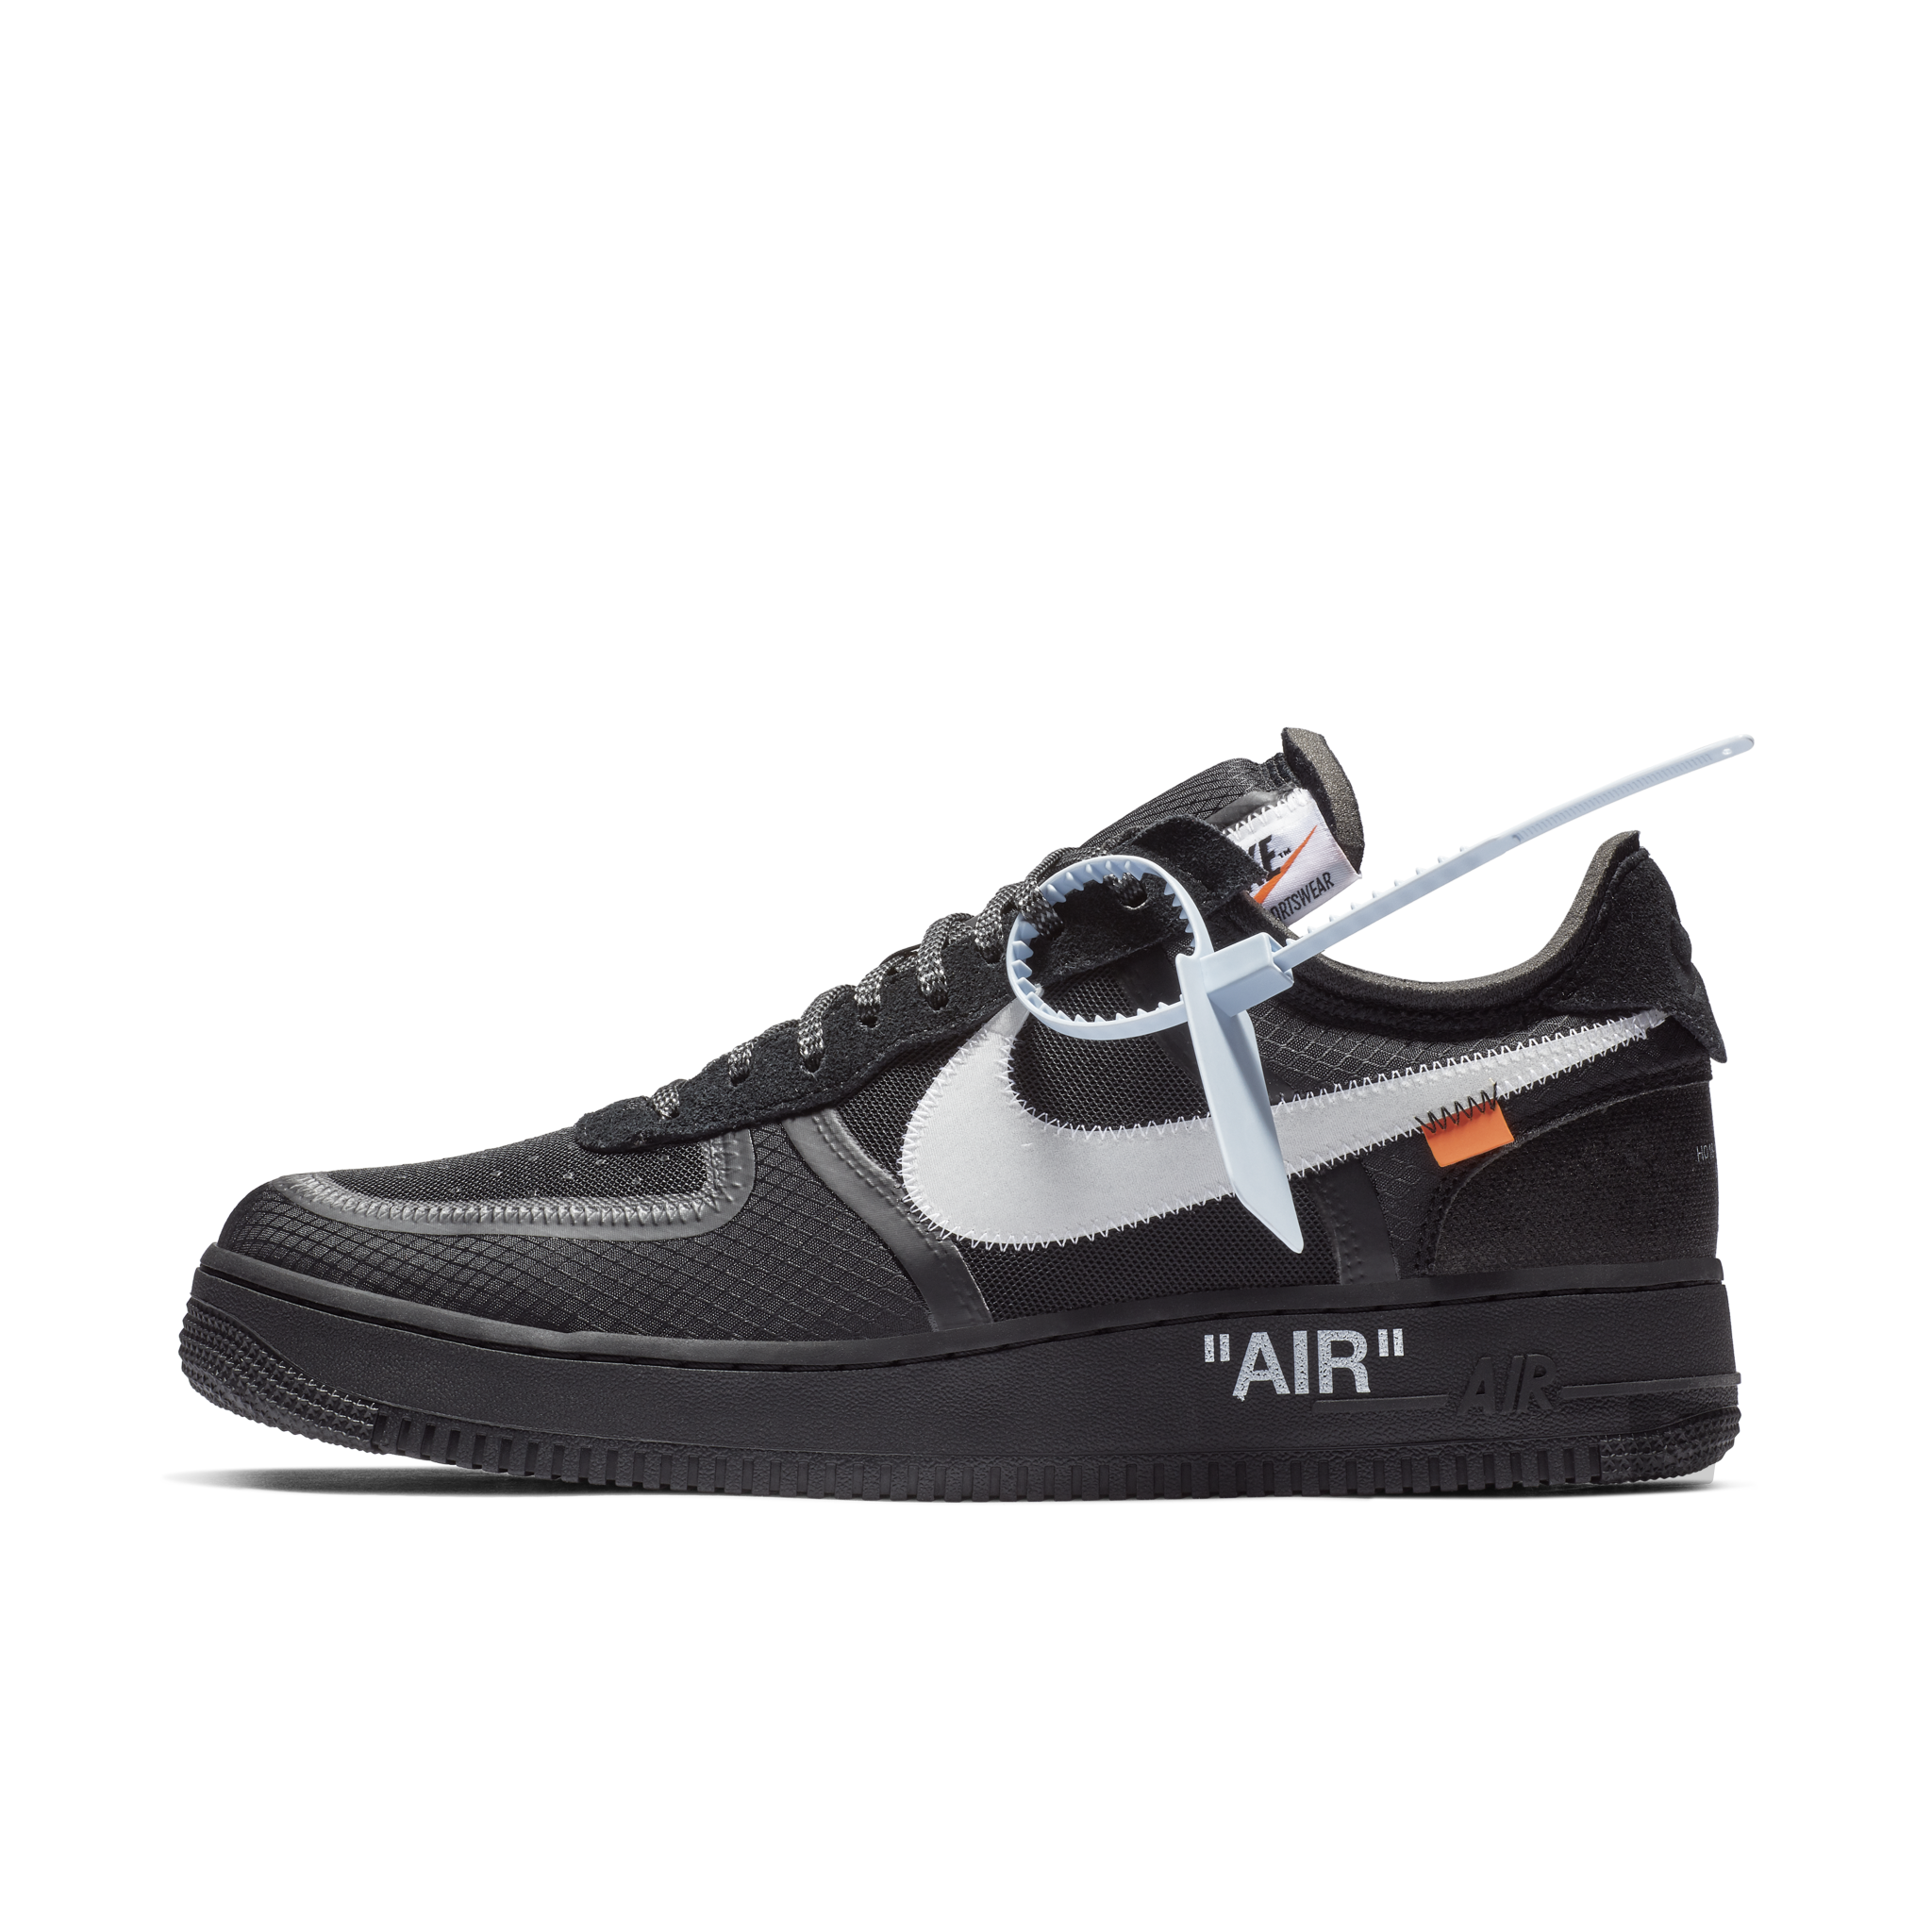 nike air force 1 low black and white